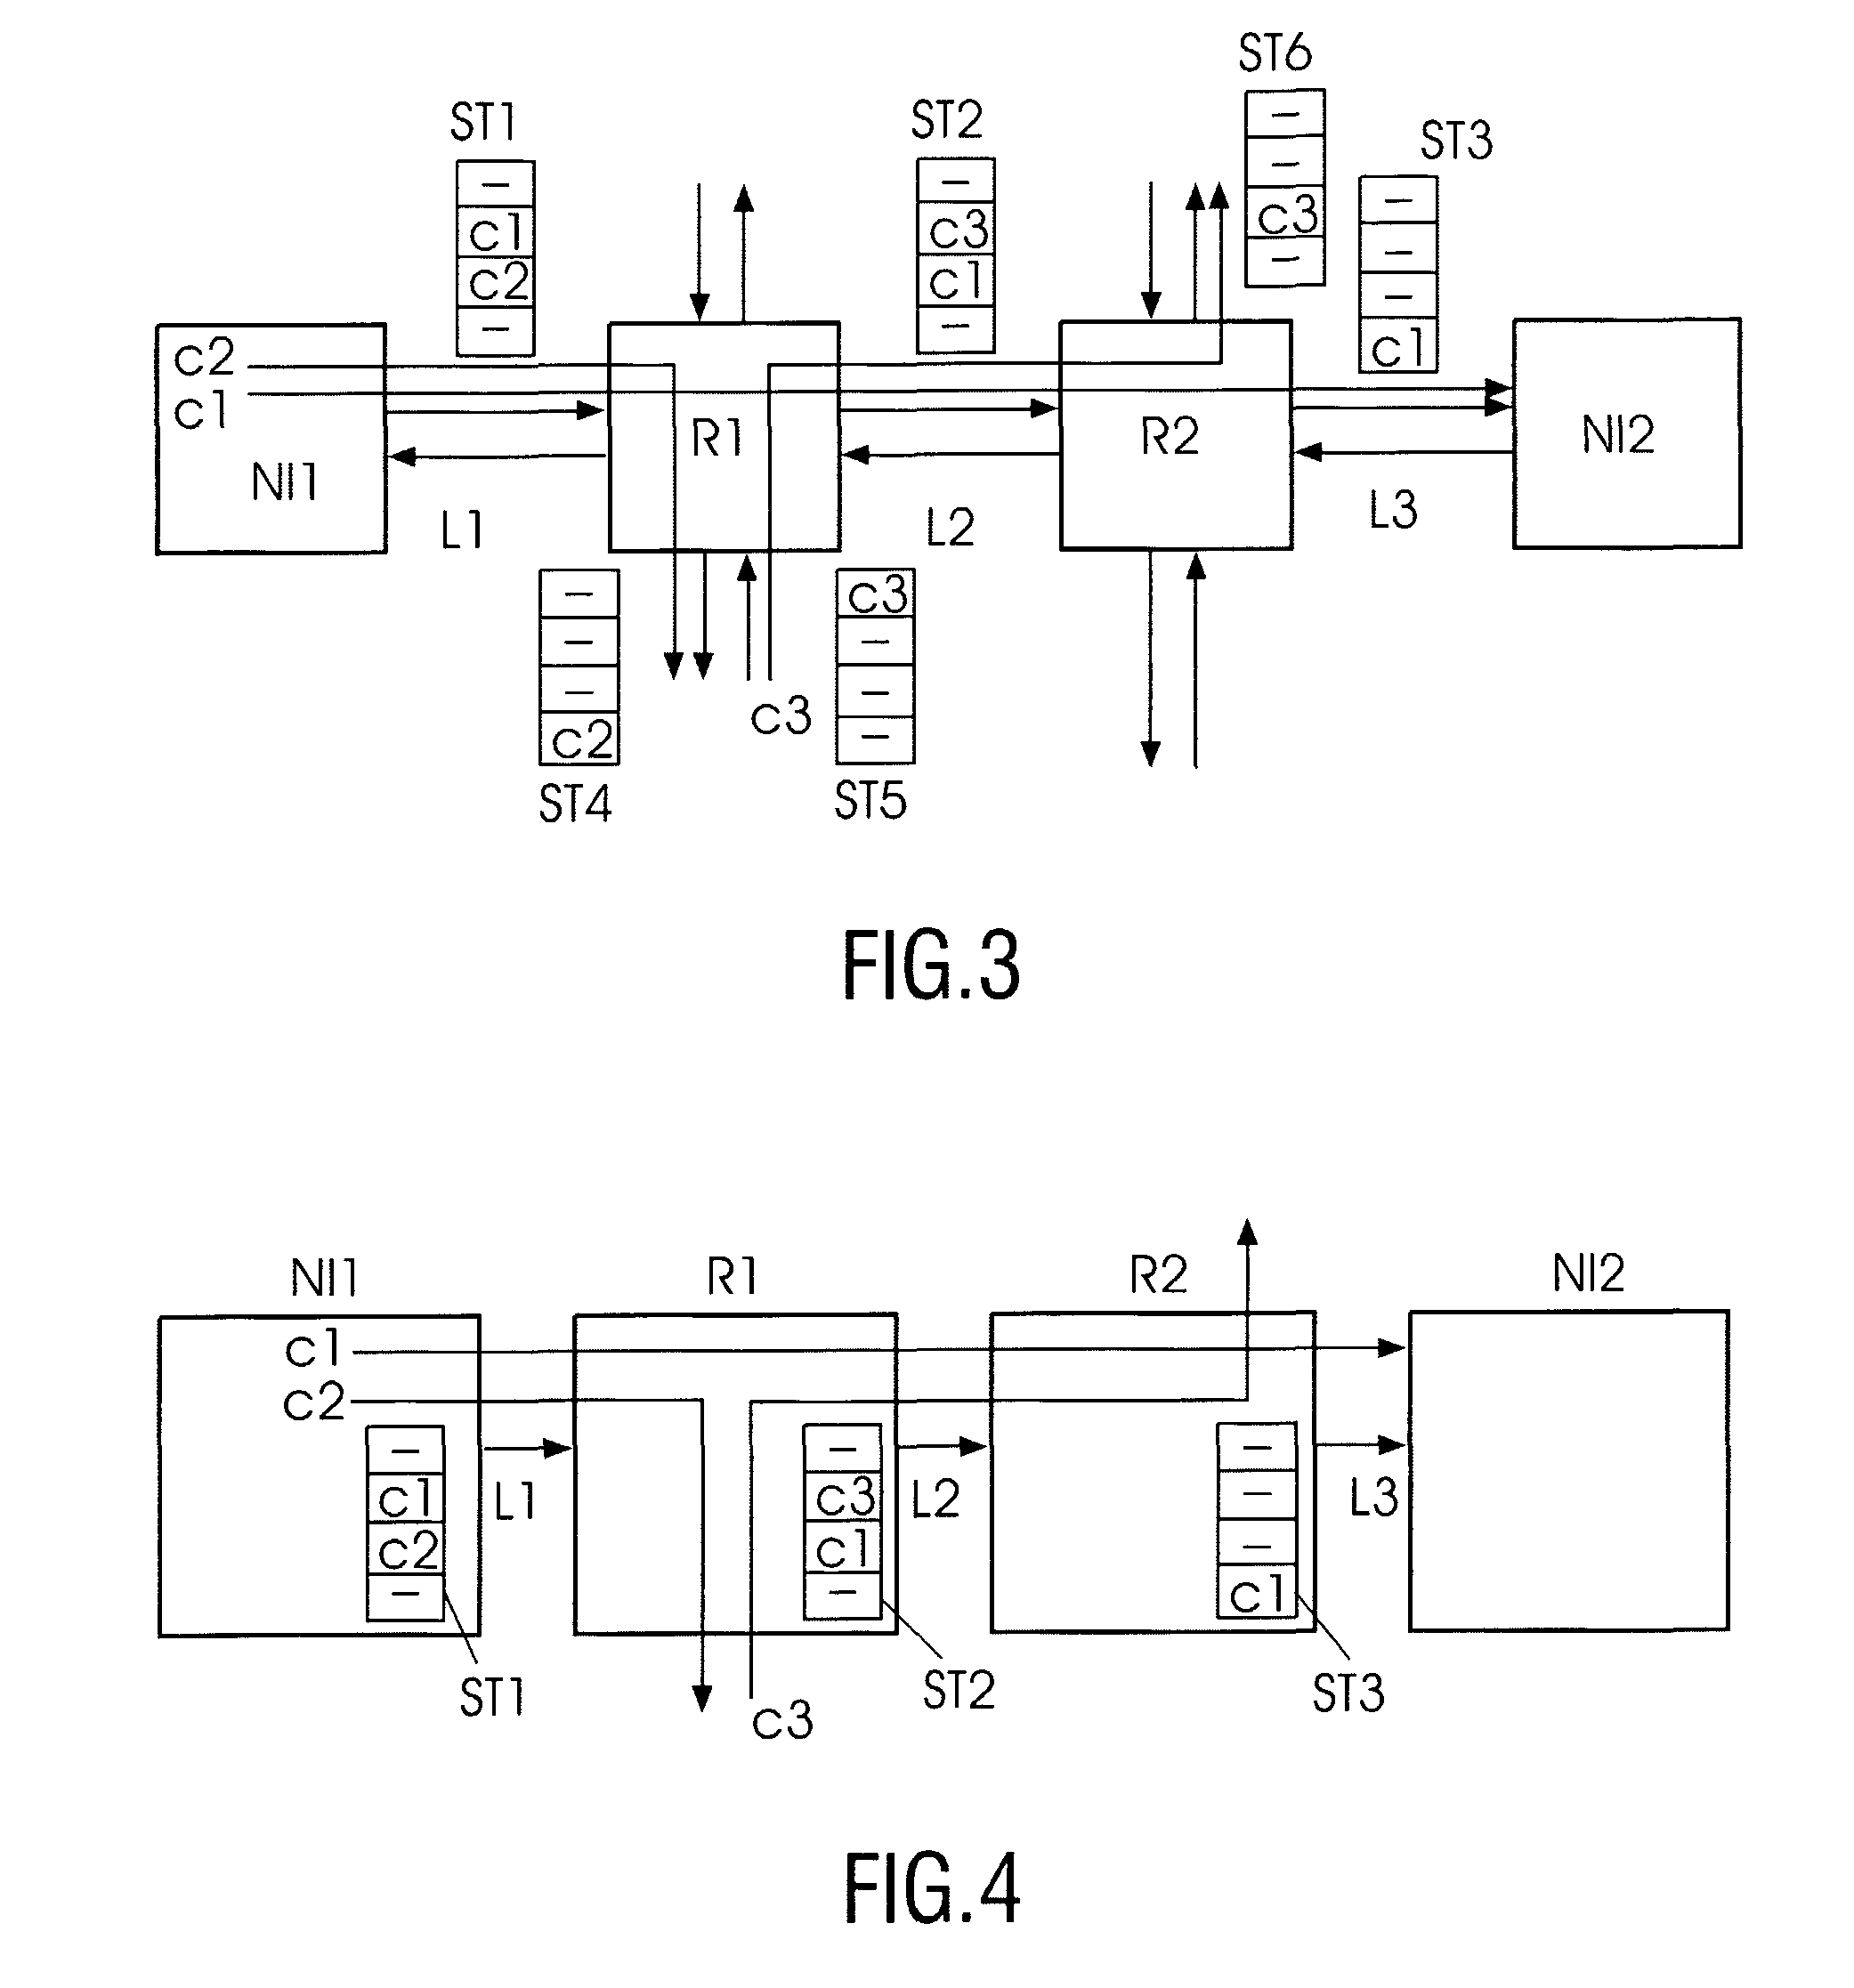 Weight factor based allocation of time slot to use link in connection path in network on chip IC